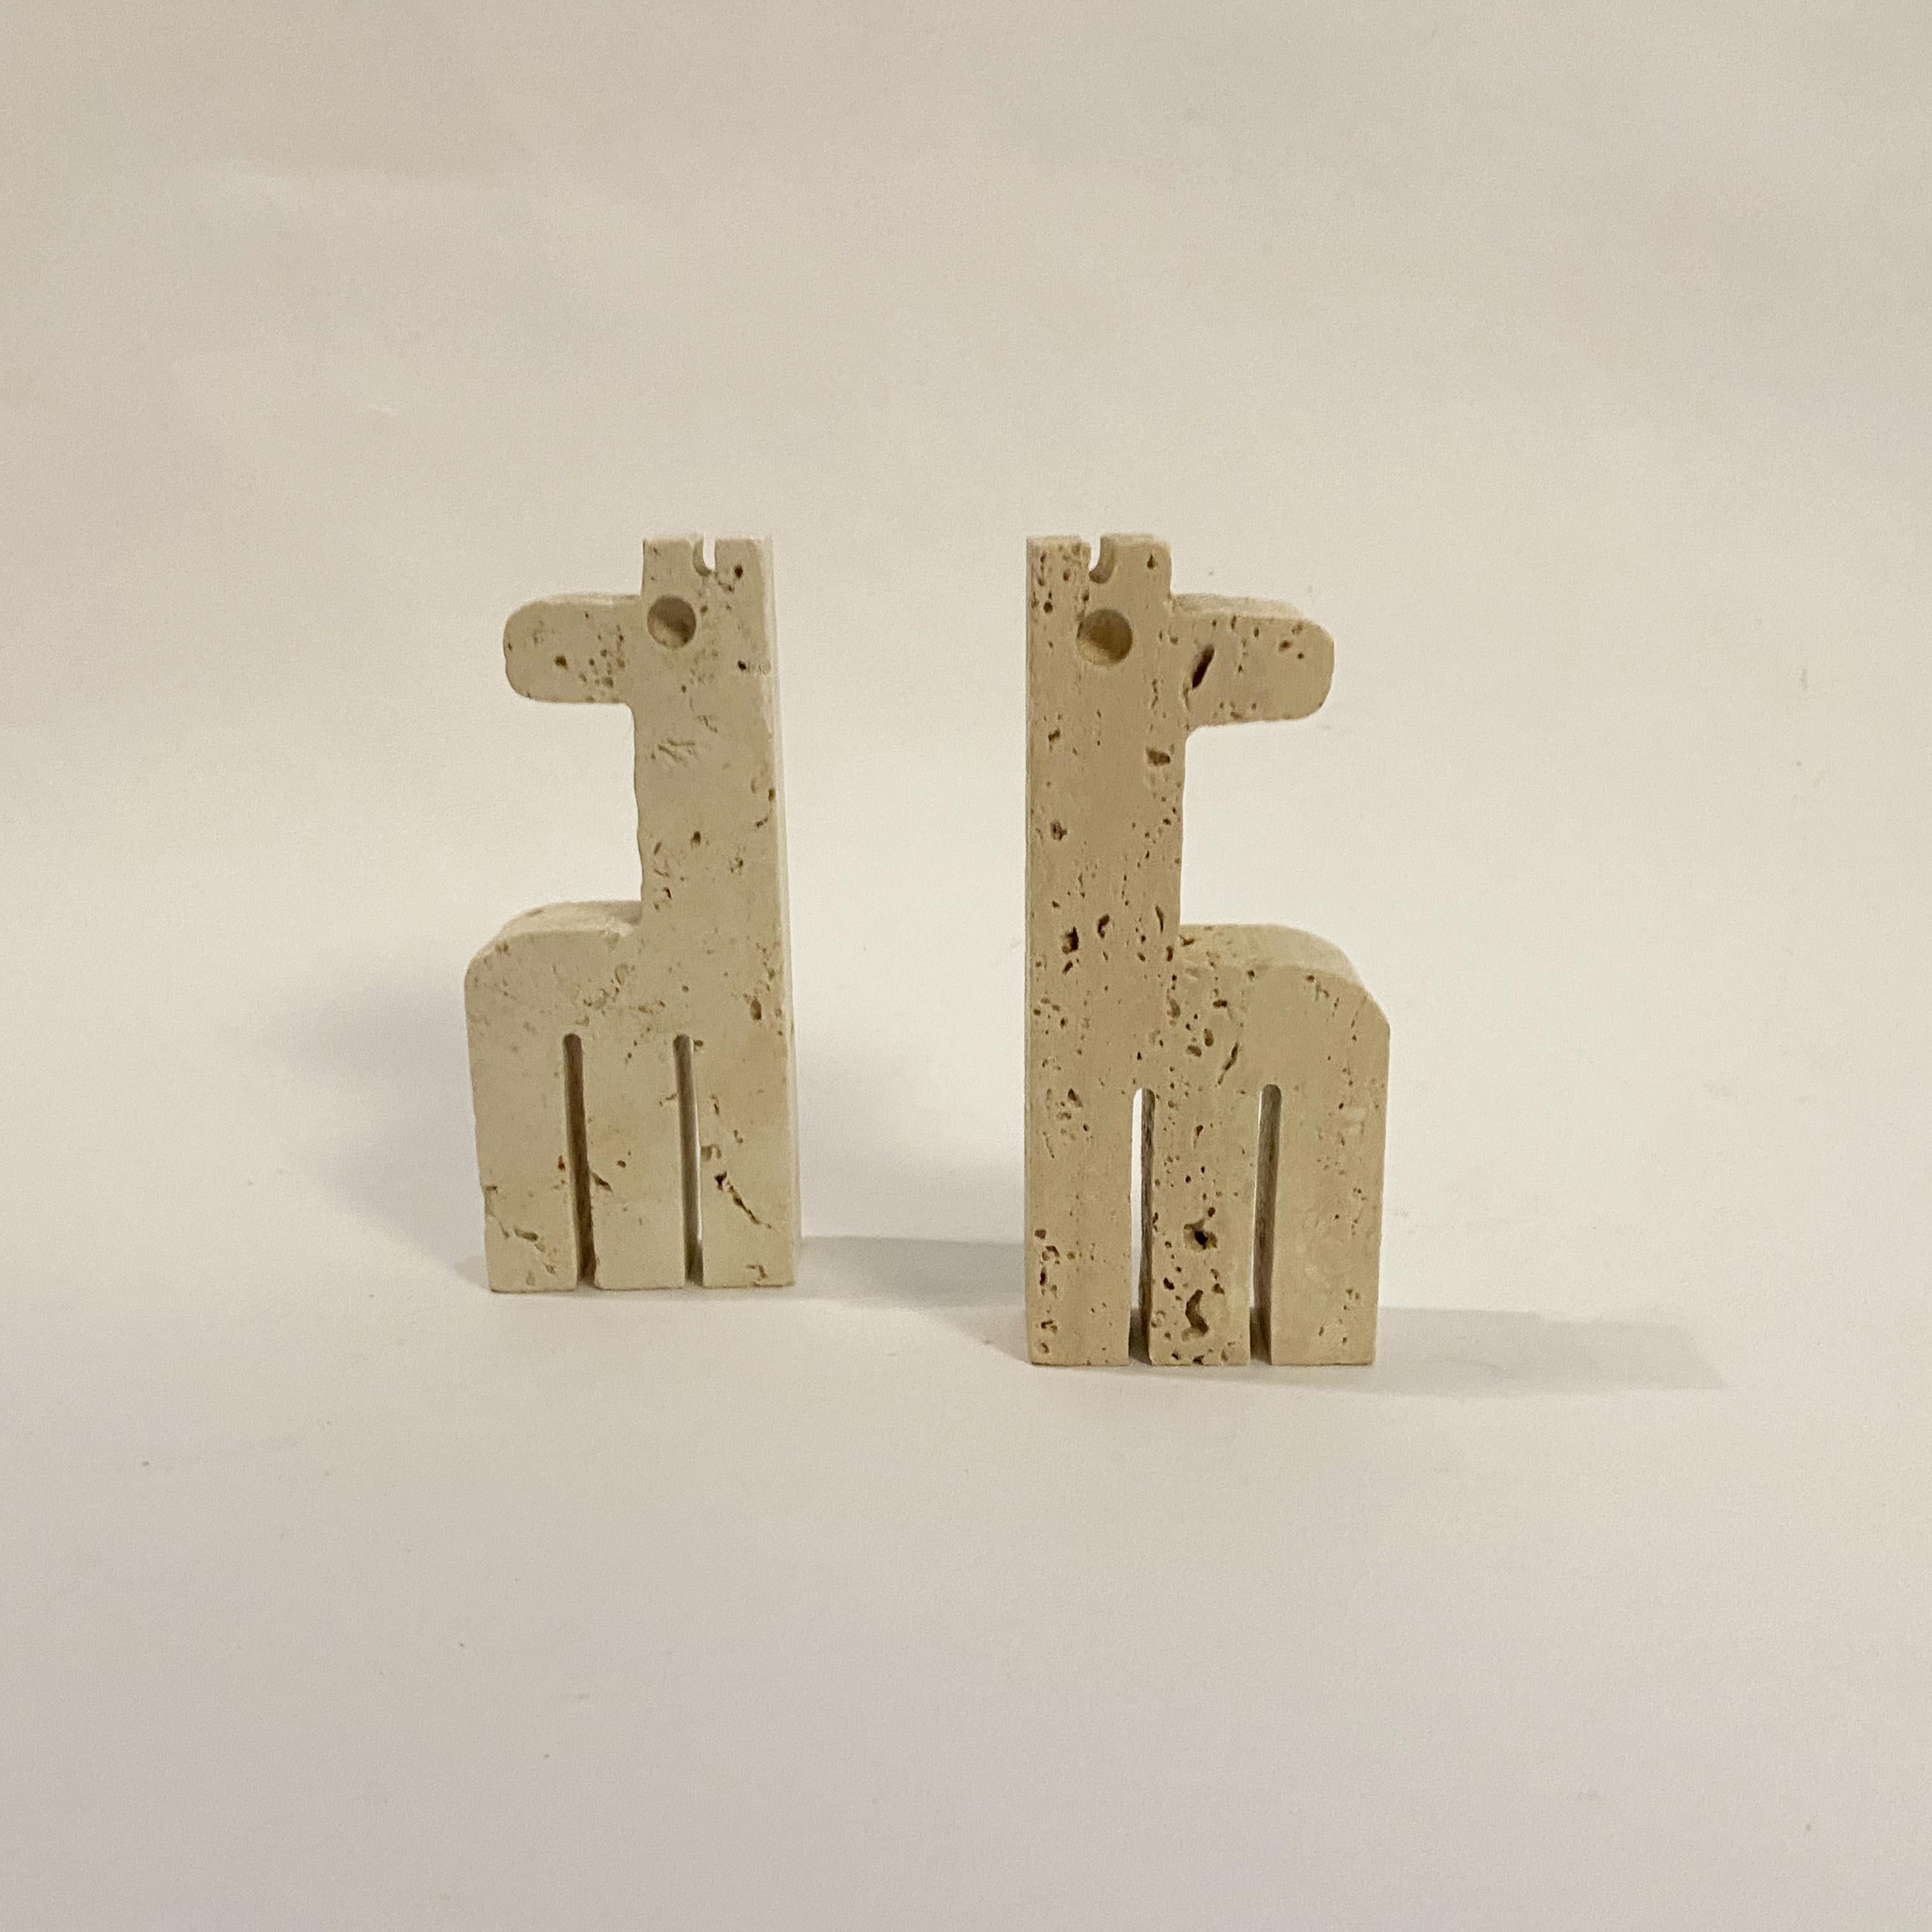 Travertine Girafes statues by Enzo Mari for Fratelli Mannelli, 1970s.

Dimensions:

Height: 12cm
Width: 5cm
Depth: 3.5cm.